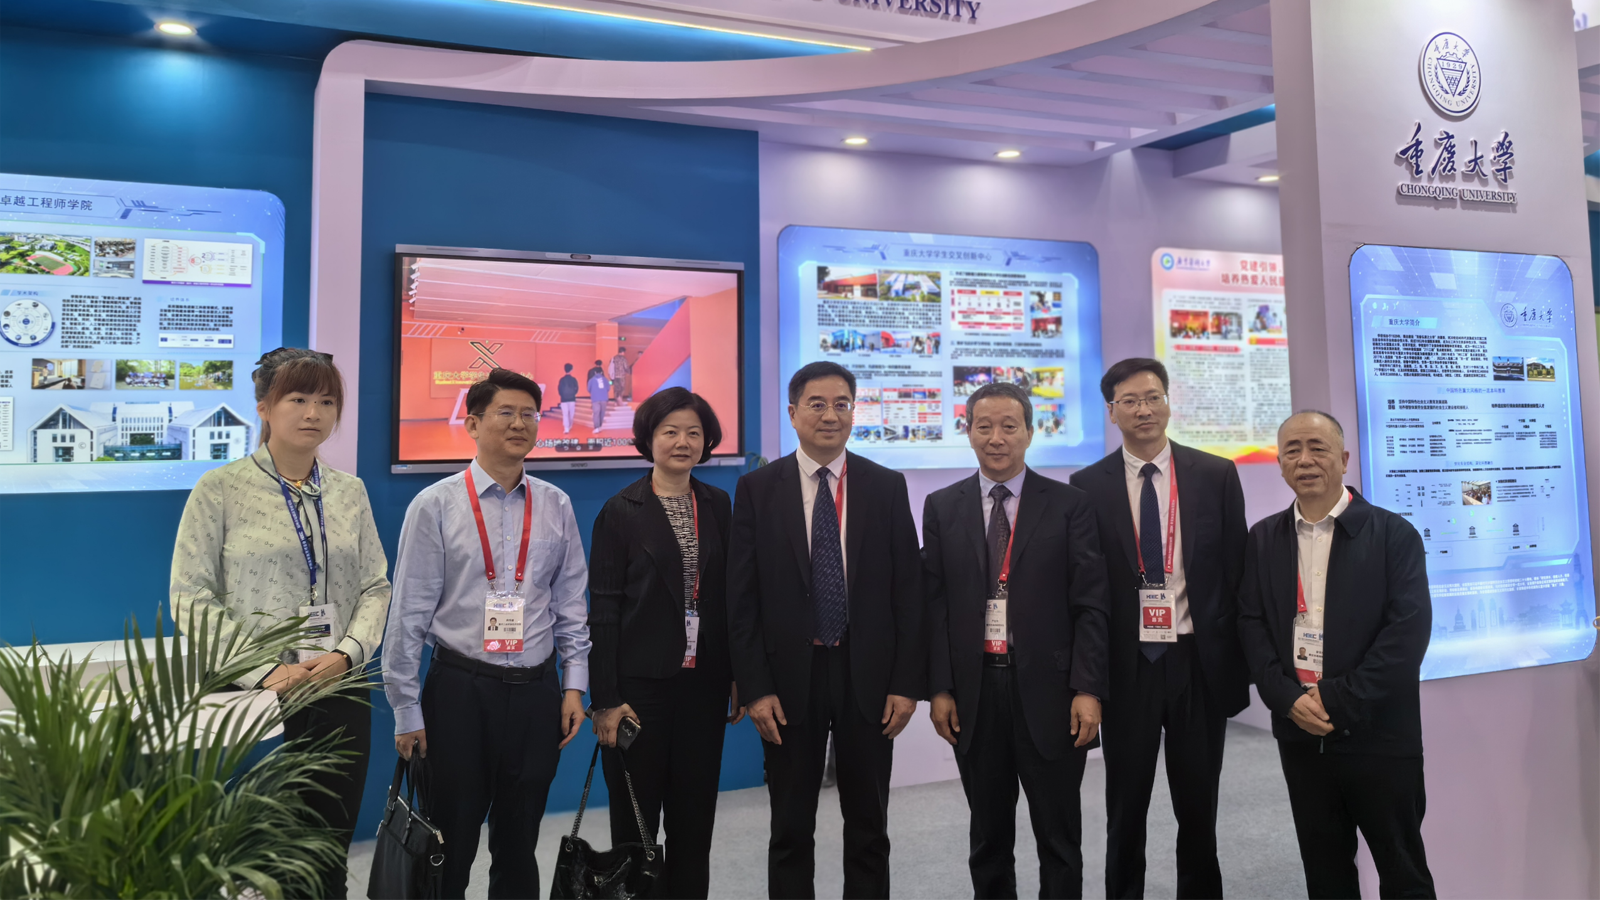 CQU Exhibits at the 61st Higher Education Expo China